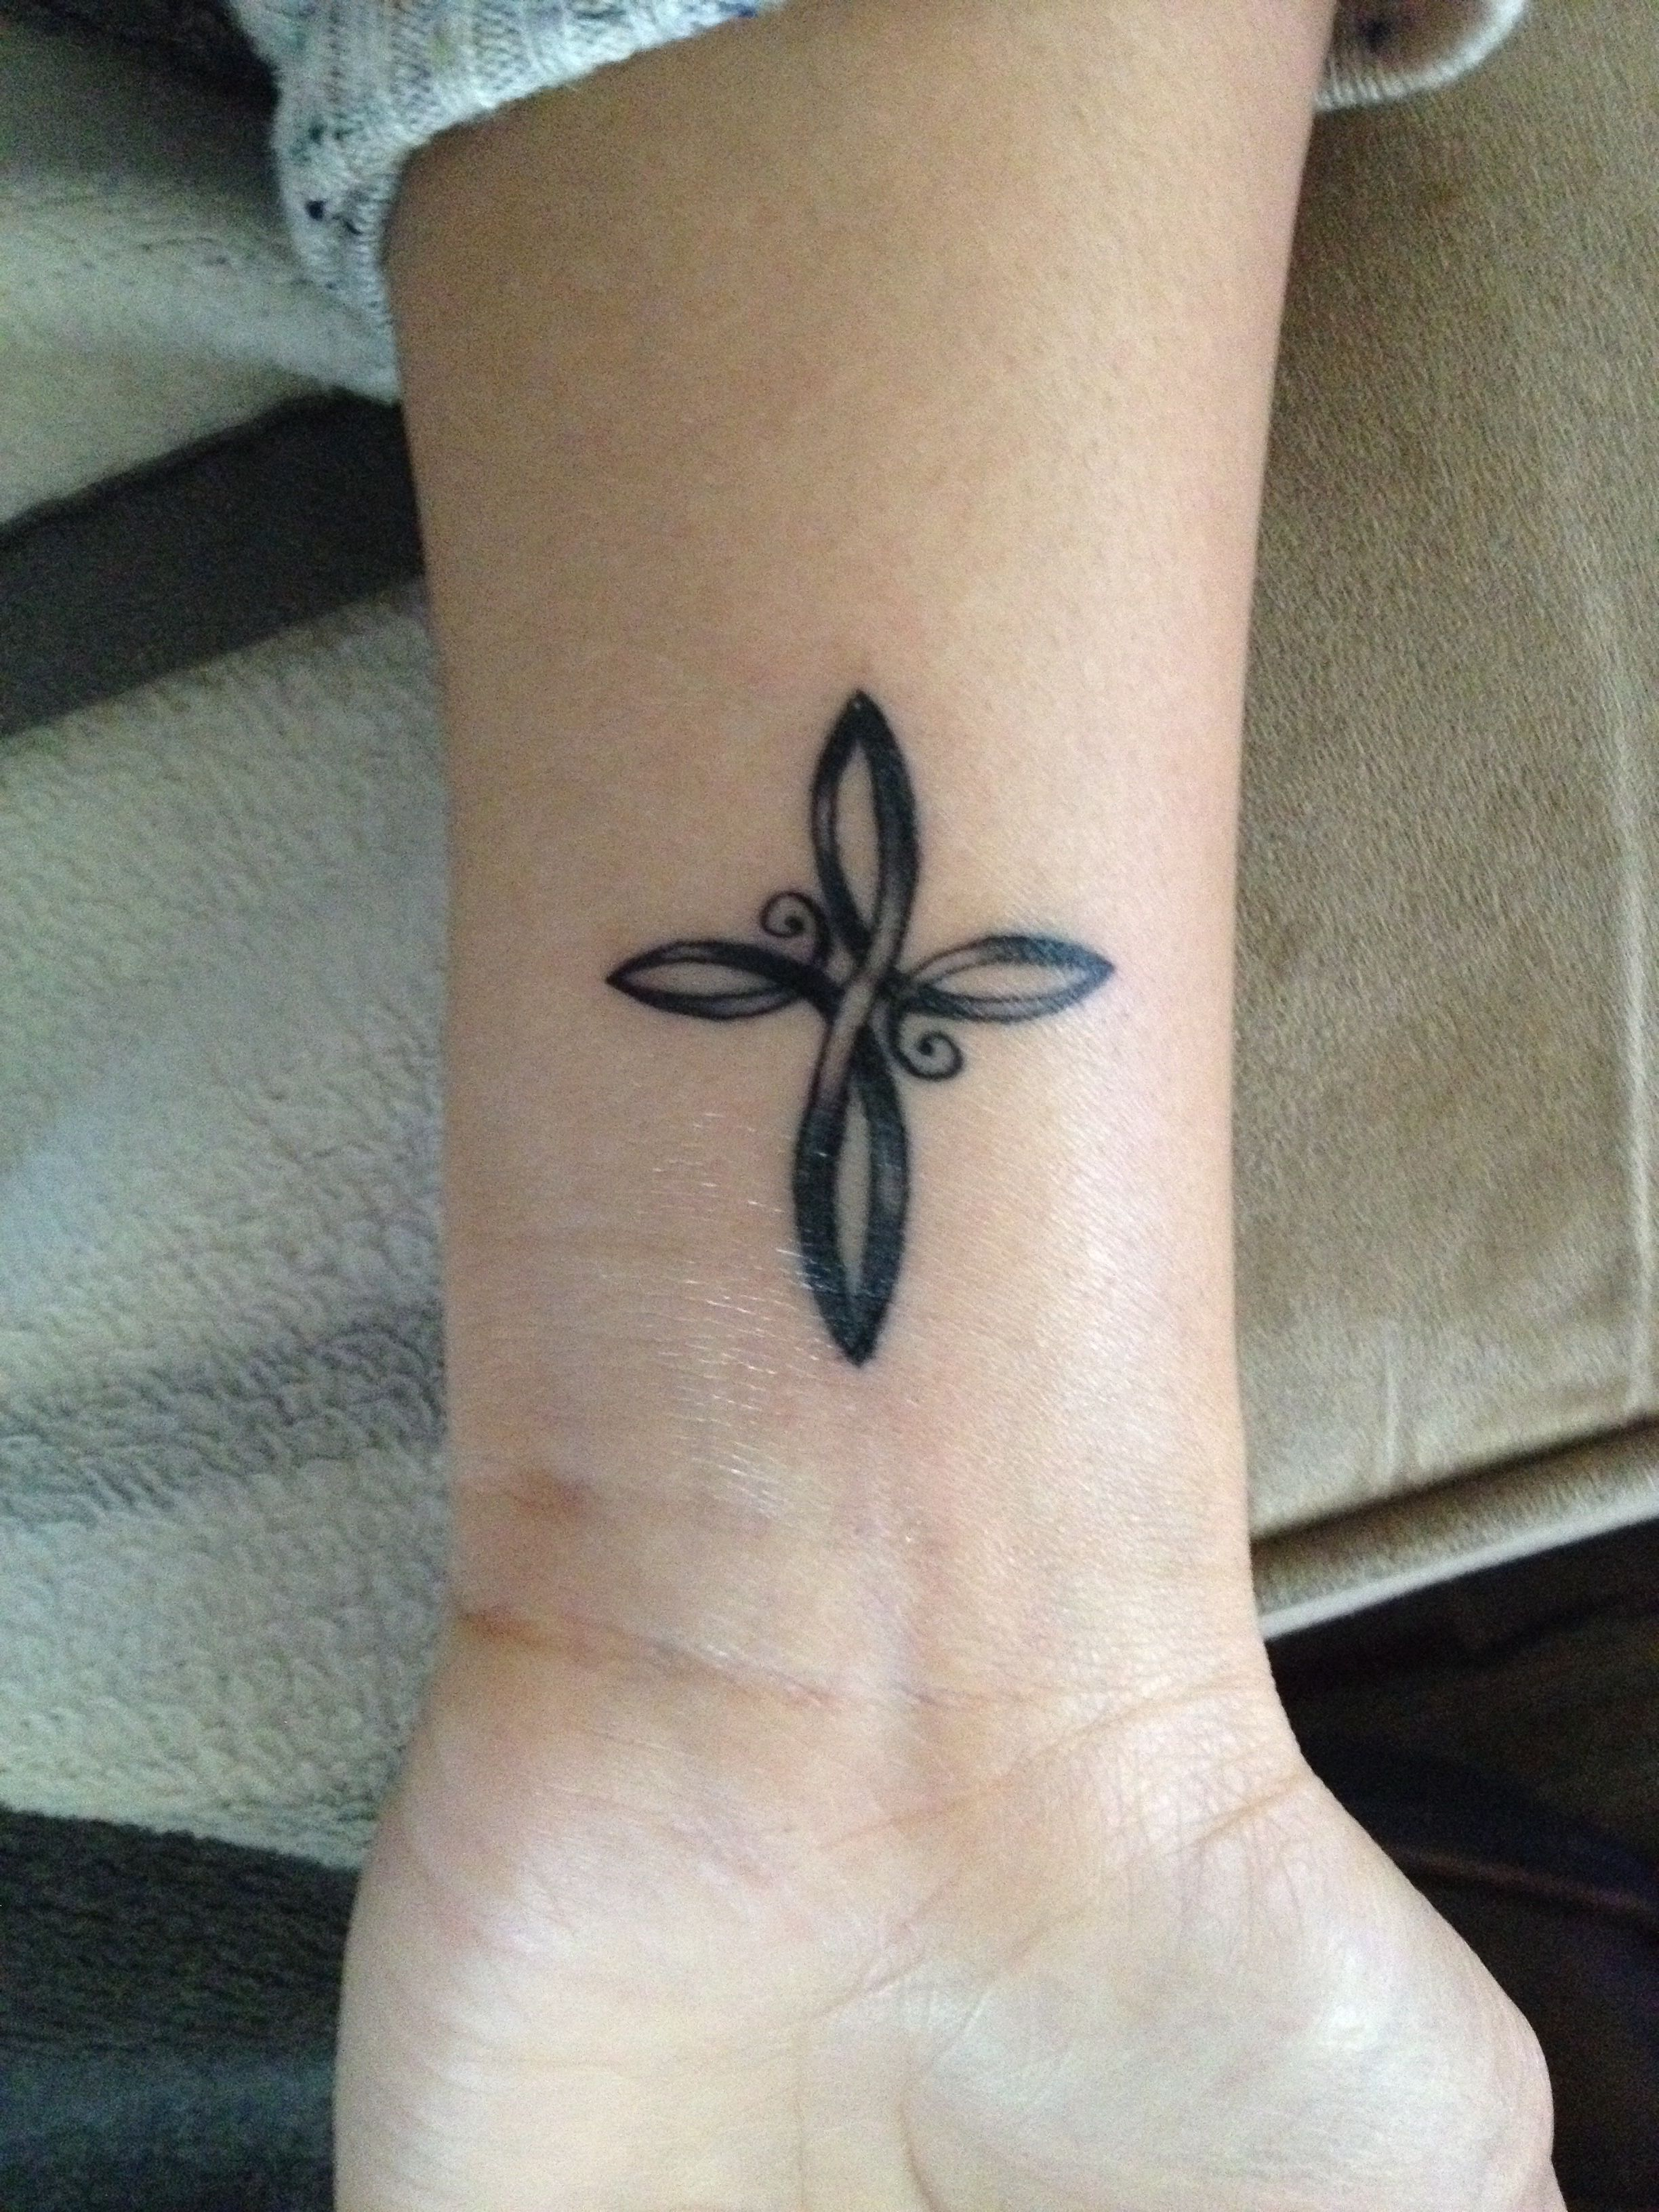 My Infinity Cross Absolutely Love It Tattoo Infinity Tattoos inside dimensions 2448 X 3264